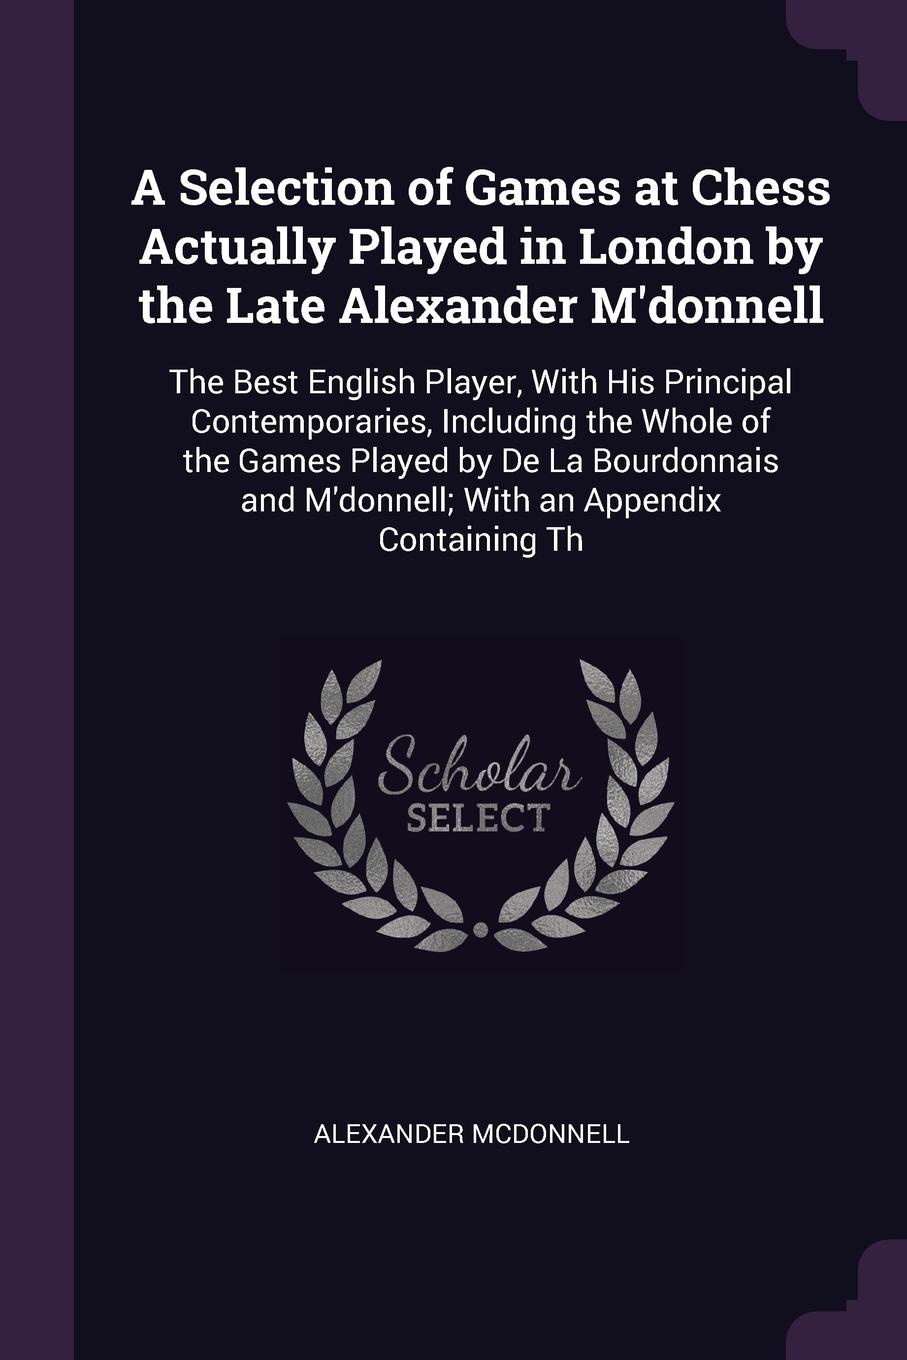 A Selection of Games at Chess Actually Played in London by the Late Alexander M`donnell. The Best English Player, With His Principal Contemporaries, Including the Whole of the Games Played by De La Bourdonnais and M`donnell; With an Appendix Conta...